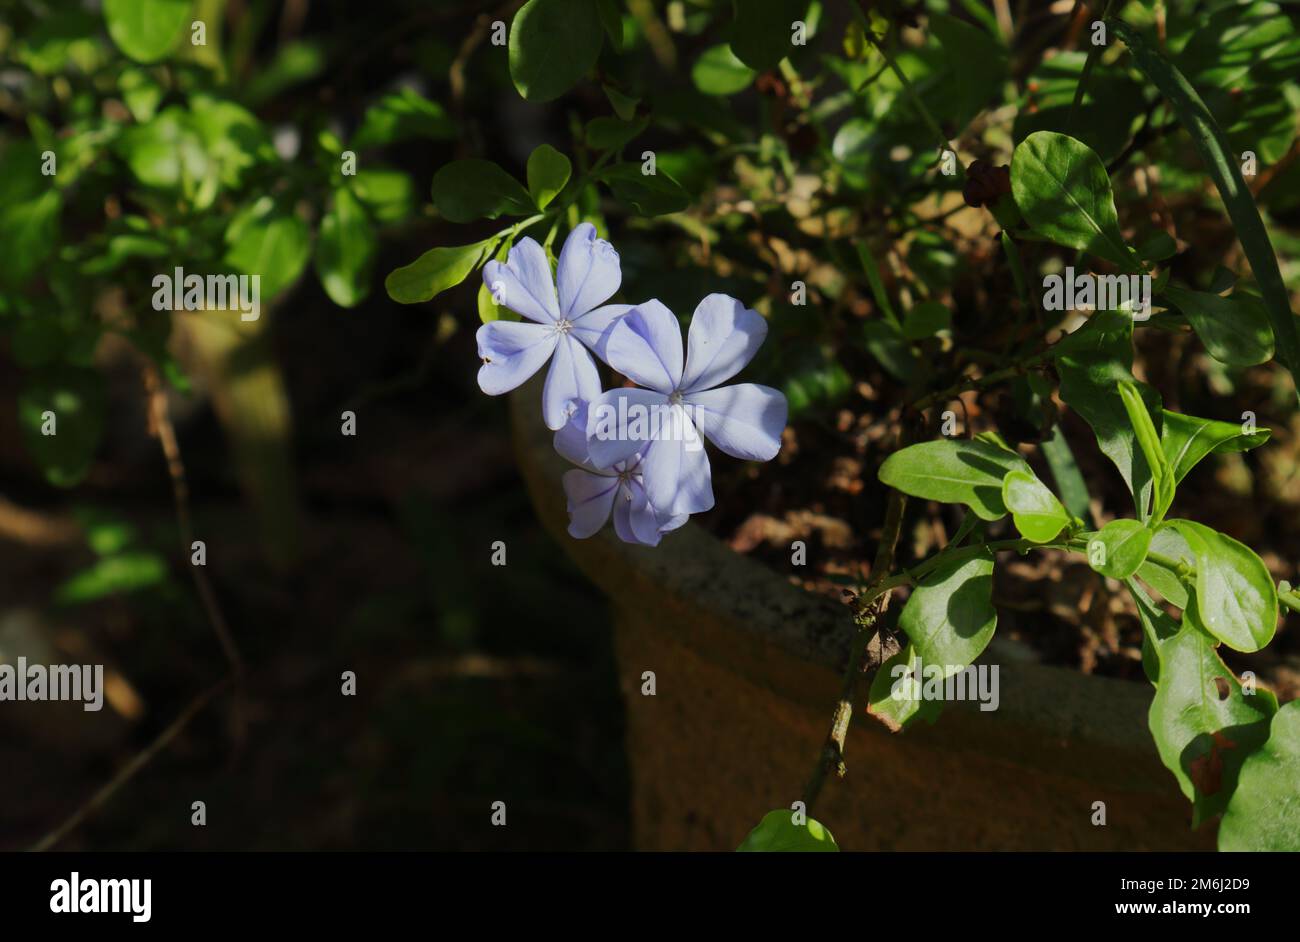 Flowers of Cape Leadwort (Plumbago Auriculata) plant with a branch, Plant is growing in a cement pot Stock Photo